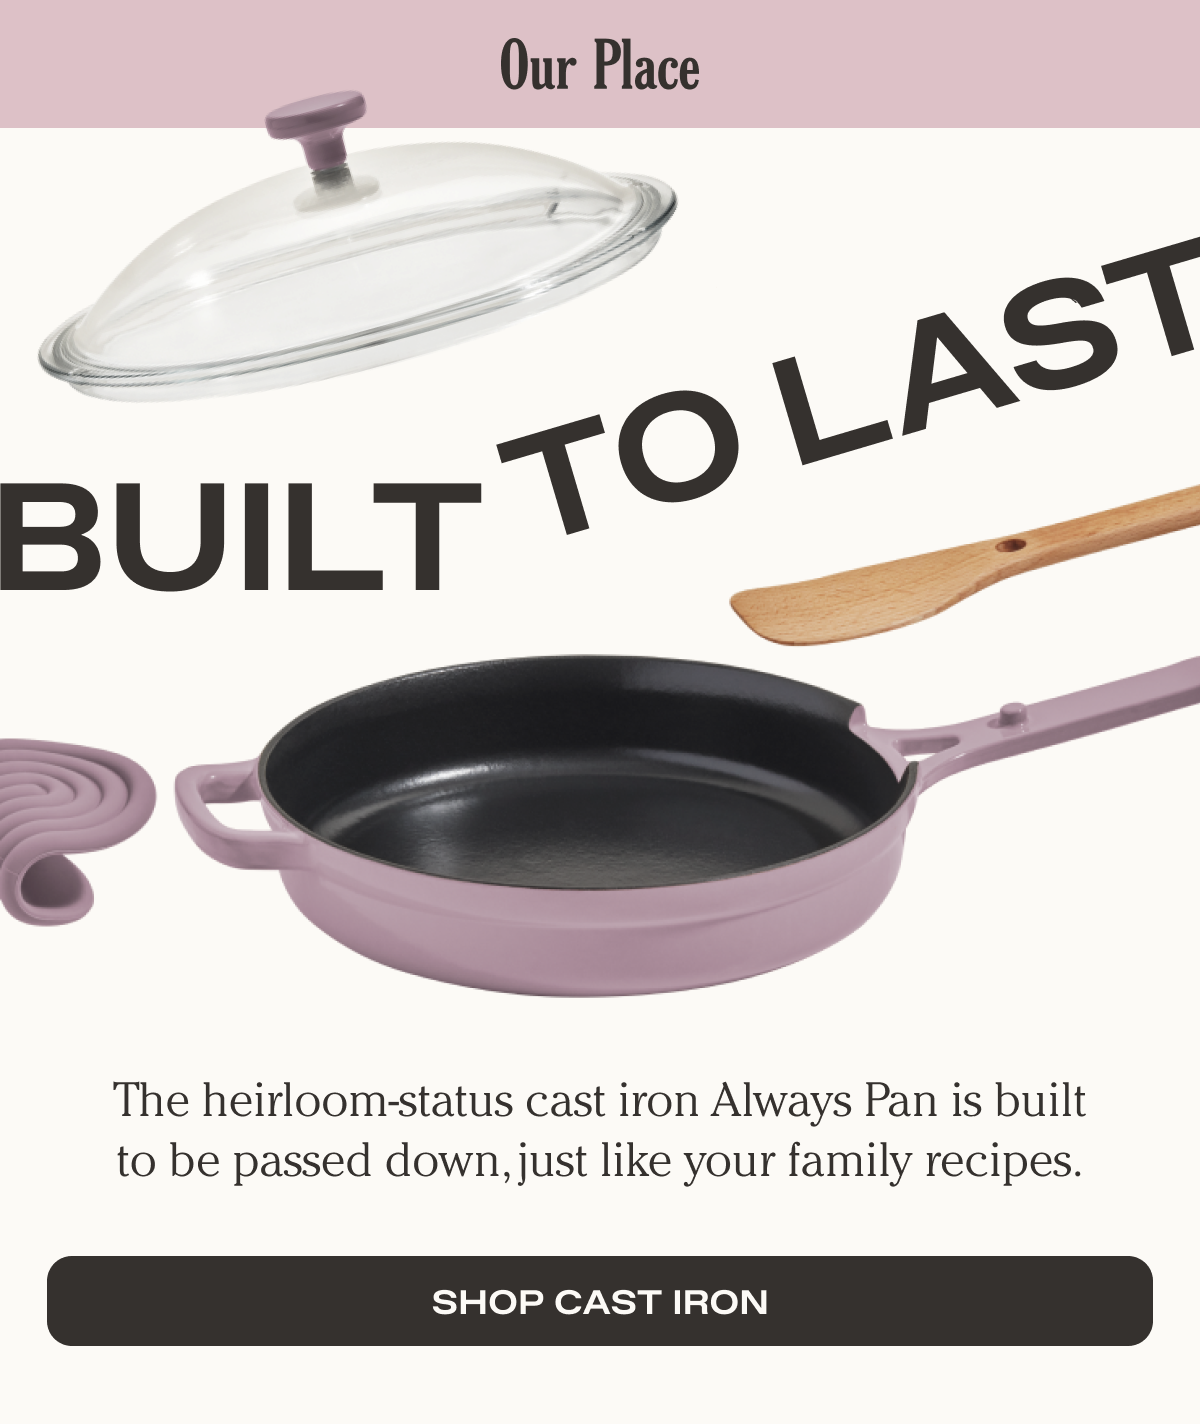 Our Place - Built to Last - The heirloom-status cast iron Always Pan is built to be passed down, just like your family recipes. - Shop Cast Iron